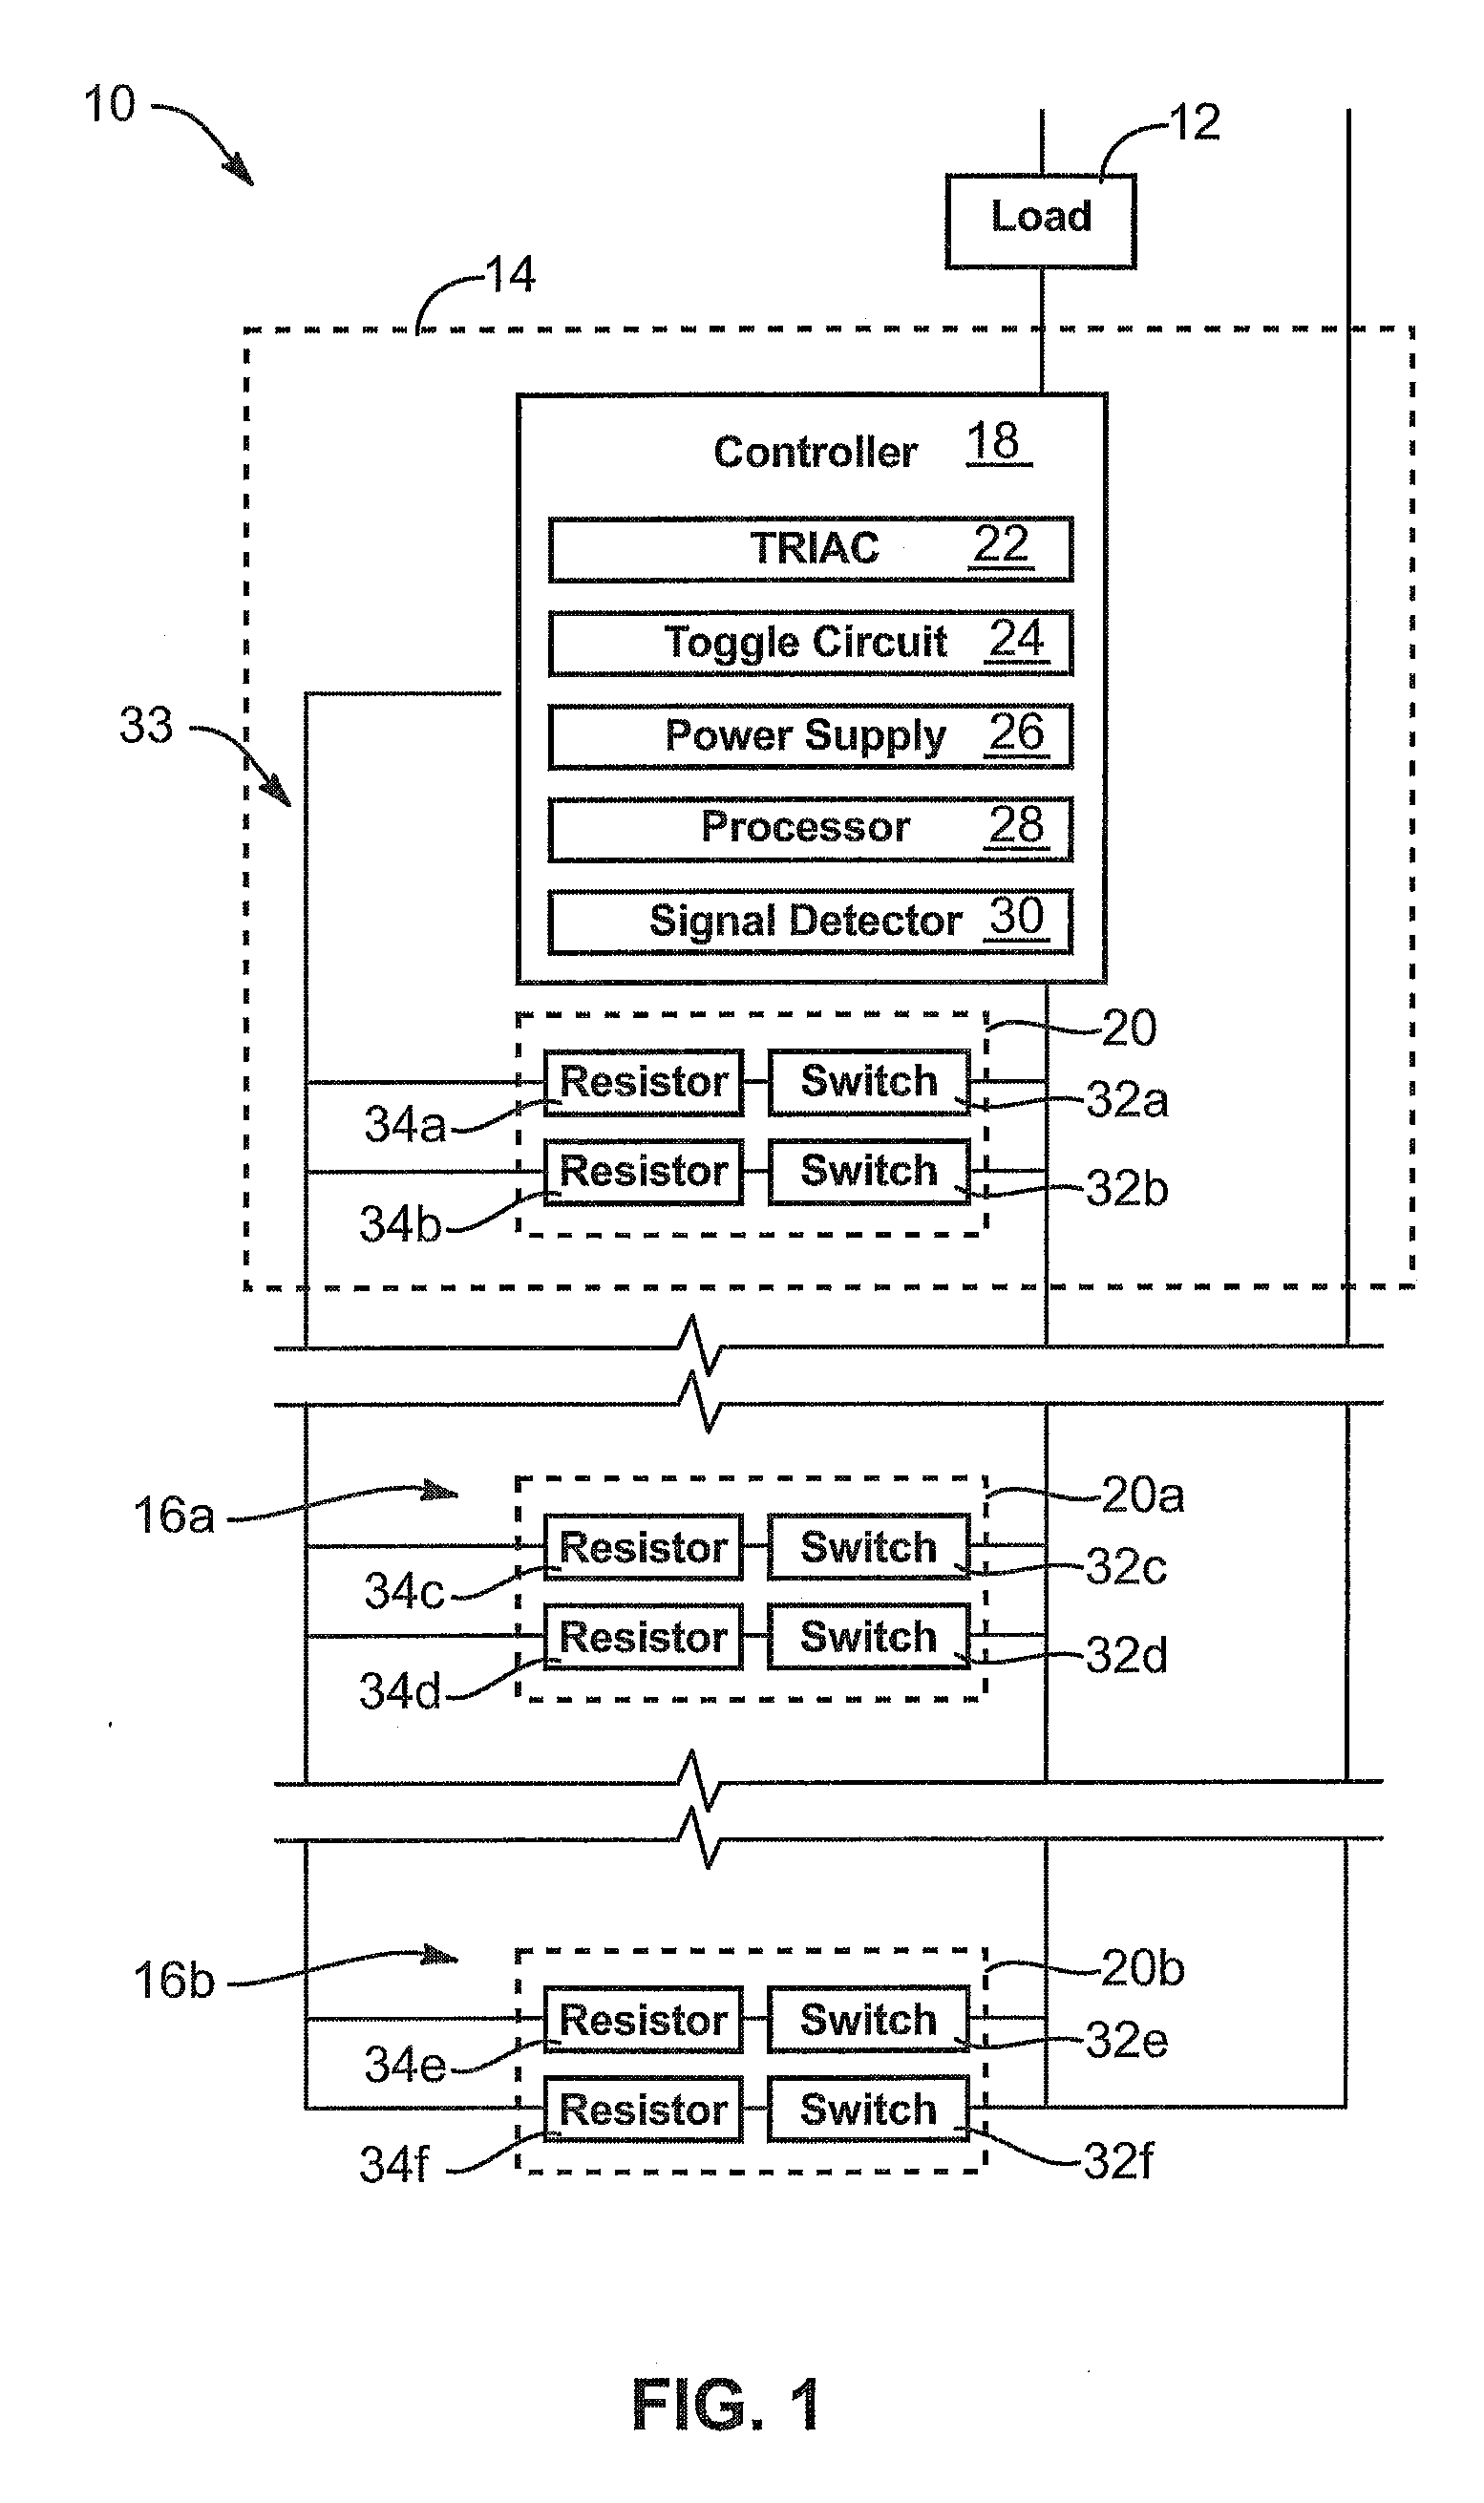 Designer-style dimmer apparatus and method